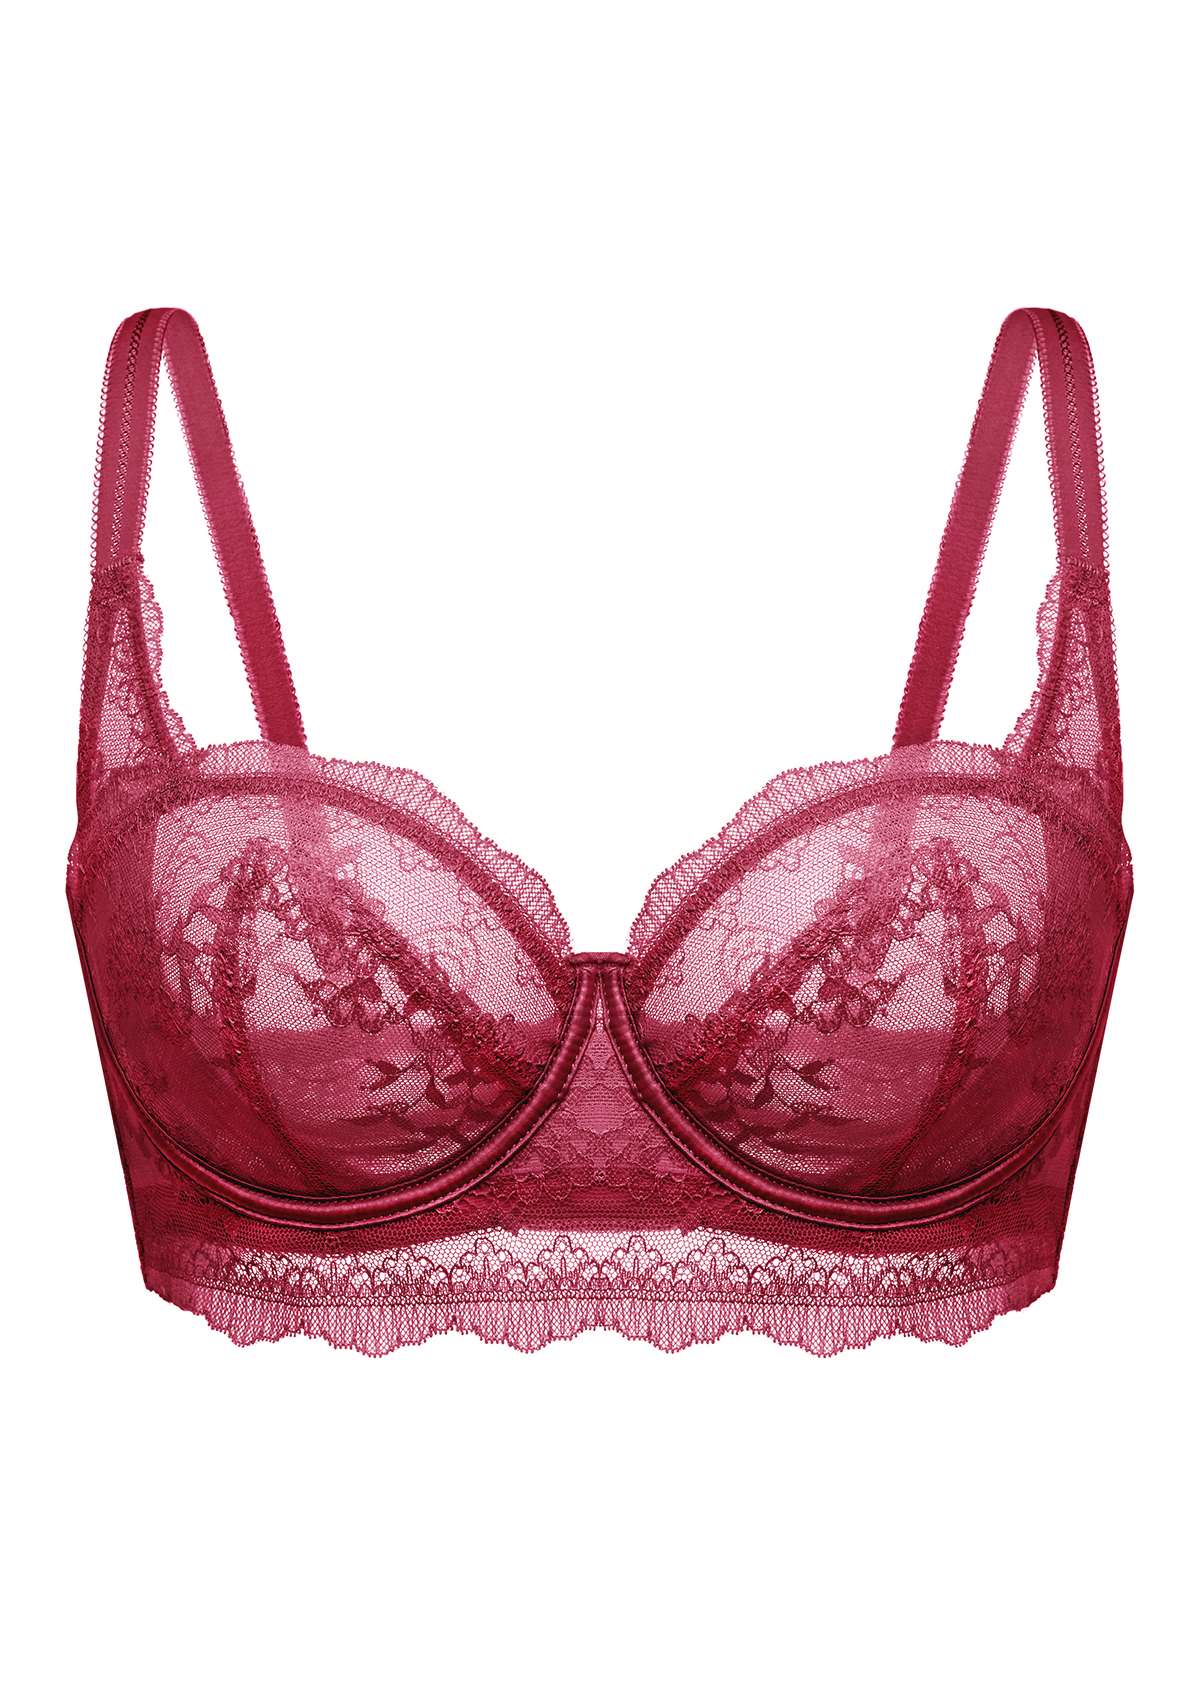 HSIA Floral Lace Unlined Bridal Balconette Bra Set - Supportive Classic - Burgundy / 42 / DDD/F